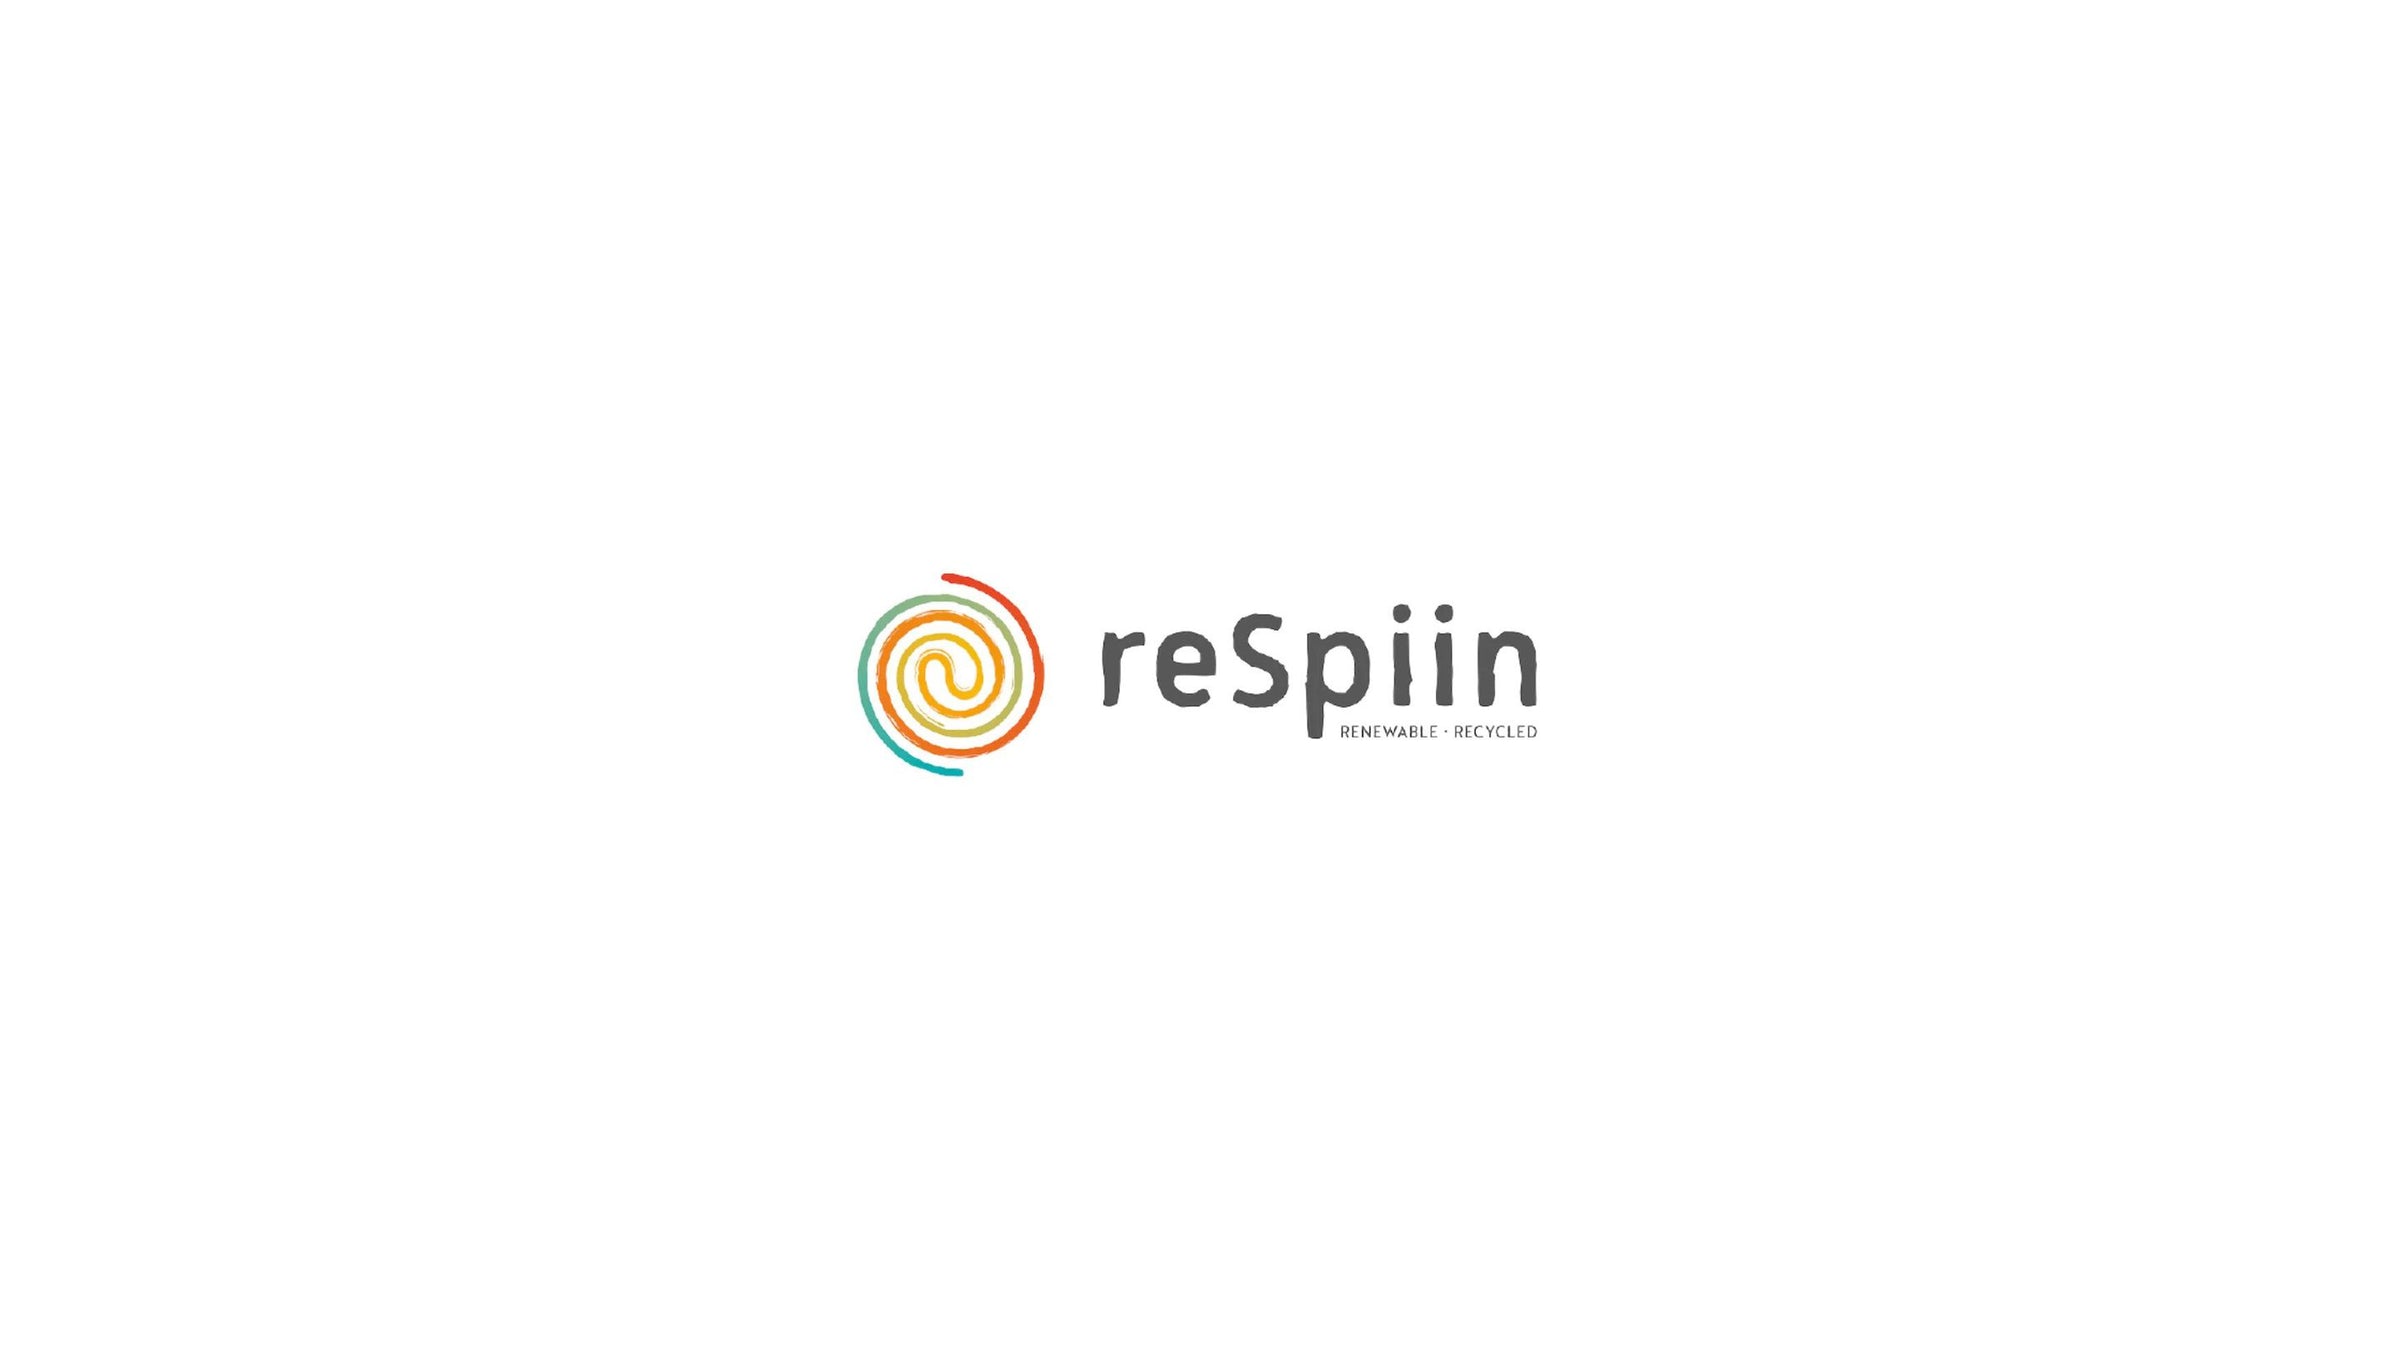 colouful siral design next to the word Respiin in a handwritten style font